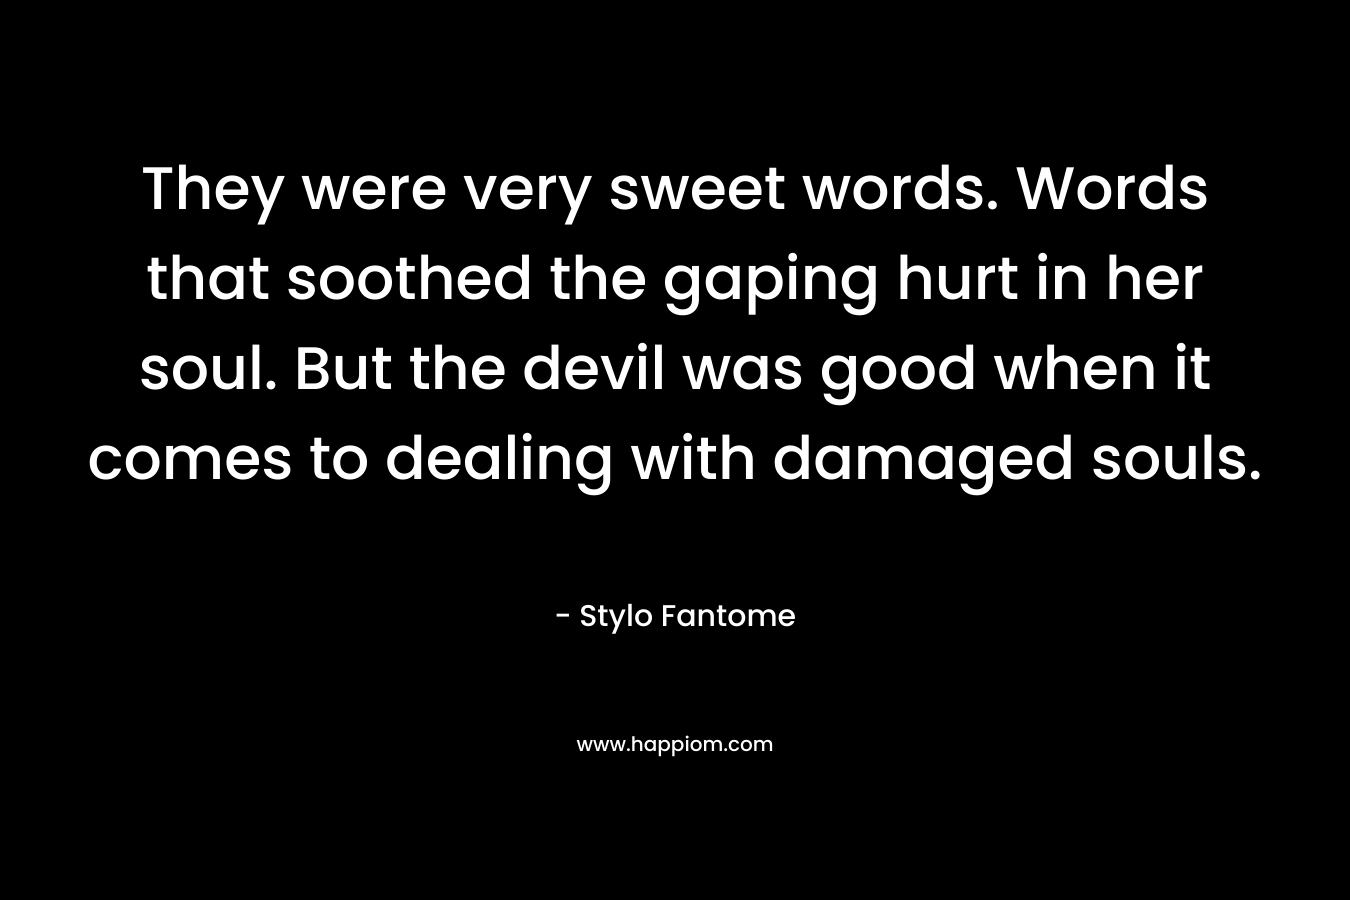 They were very sweet words. Words that soothed the gaping hurt in her soul. But the devil was good when it comes to dealing with damaged souls. – Stylo Fantome